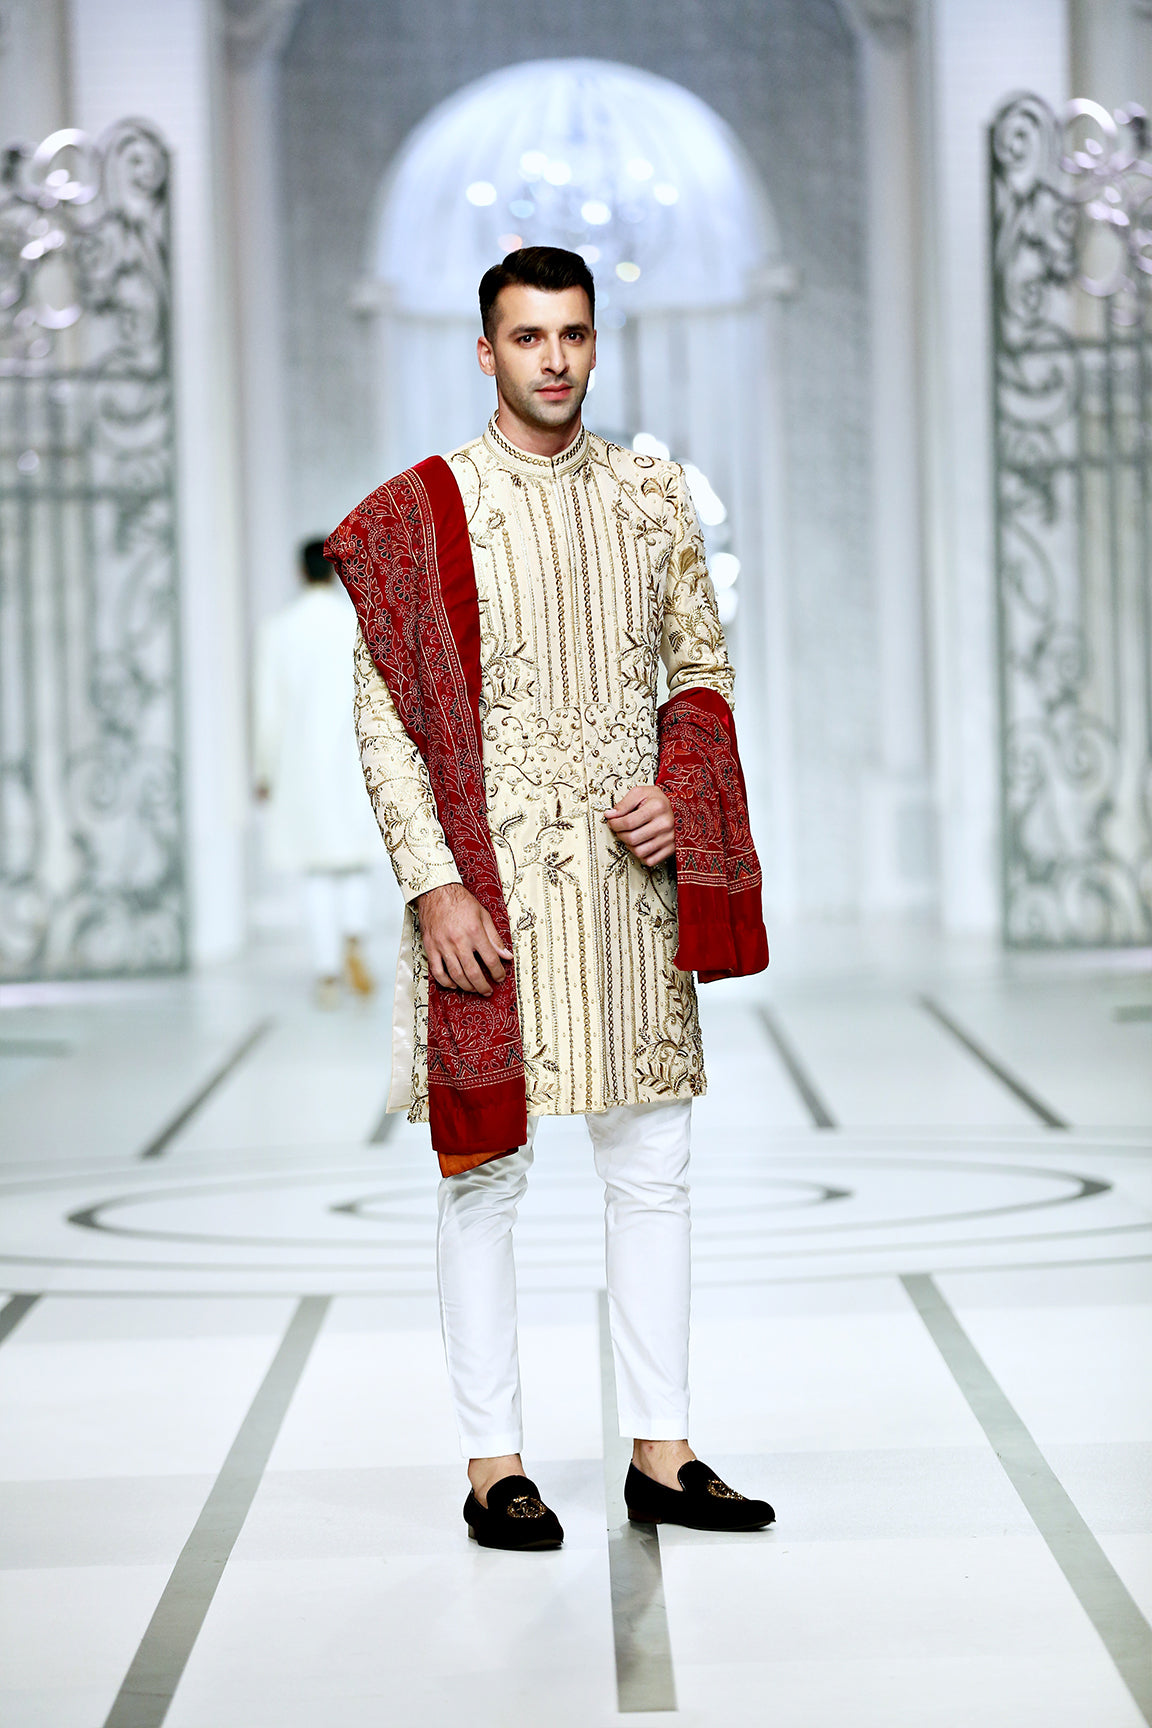 Golden Gold Sherwani by BCW 37 - Luxurious Groom's Ensemble for Grand Celebrations